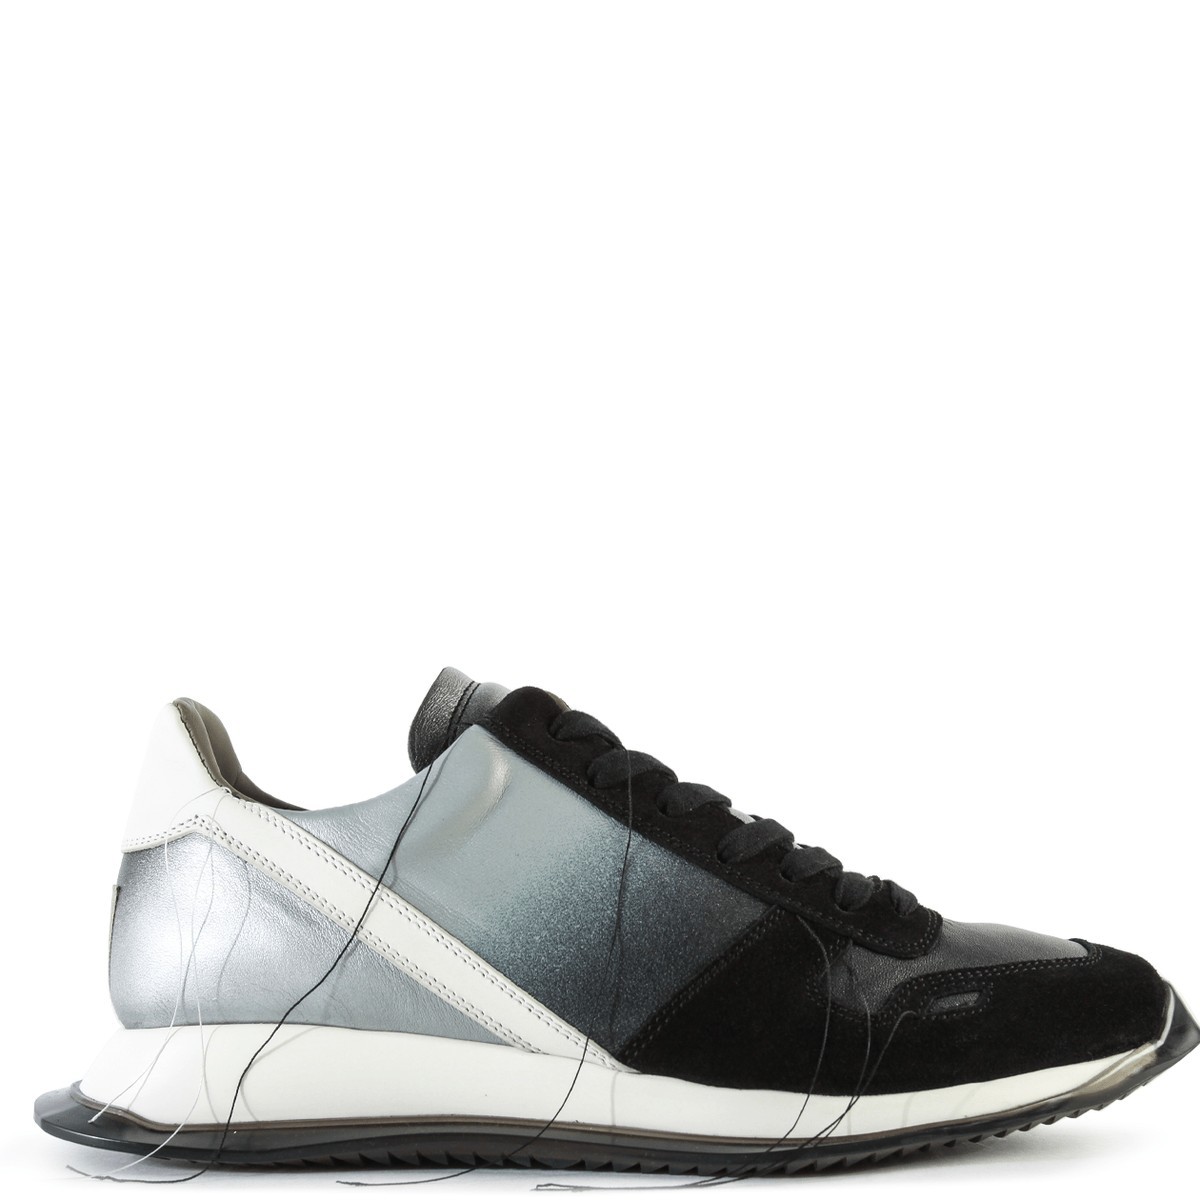 BNWT AW19 RICK OWENS "LARRY" NEW VINTAGE RUNNER LACE UP 44 - 1